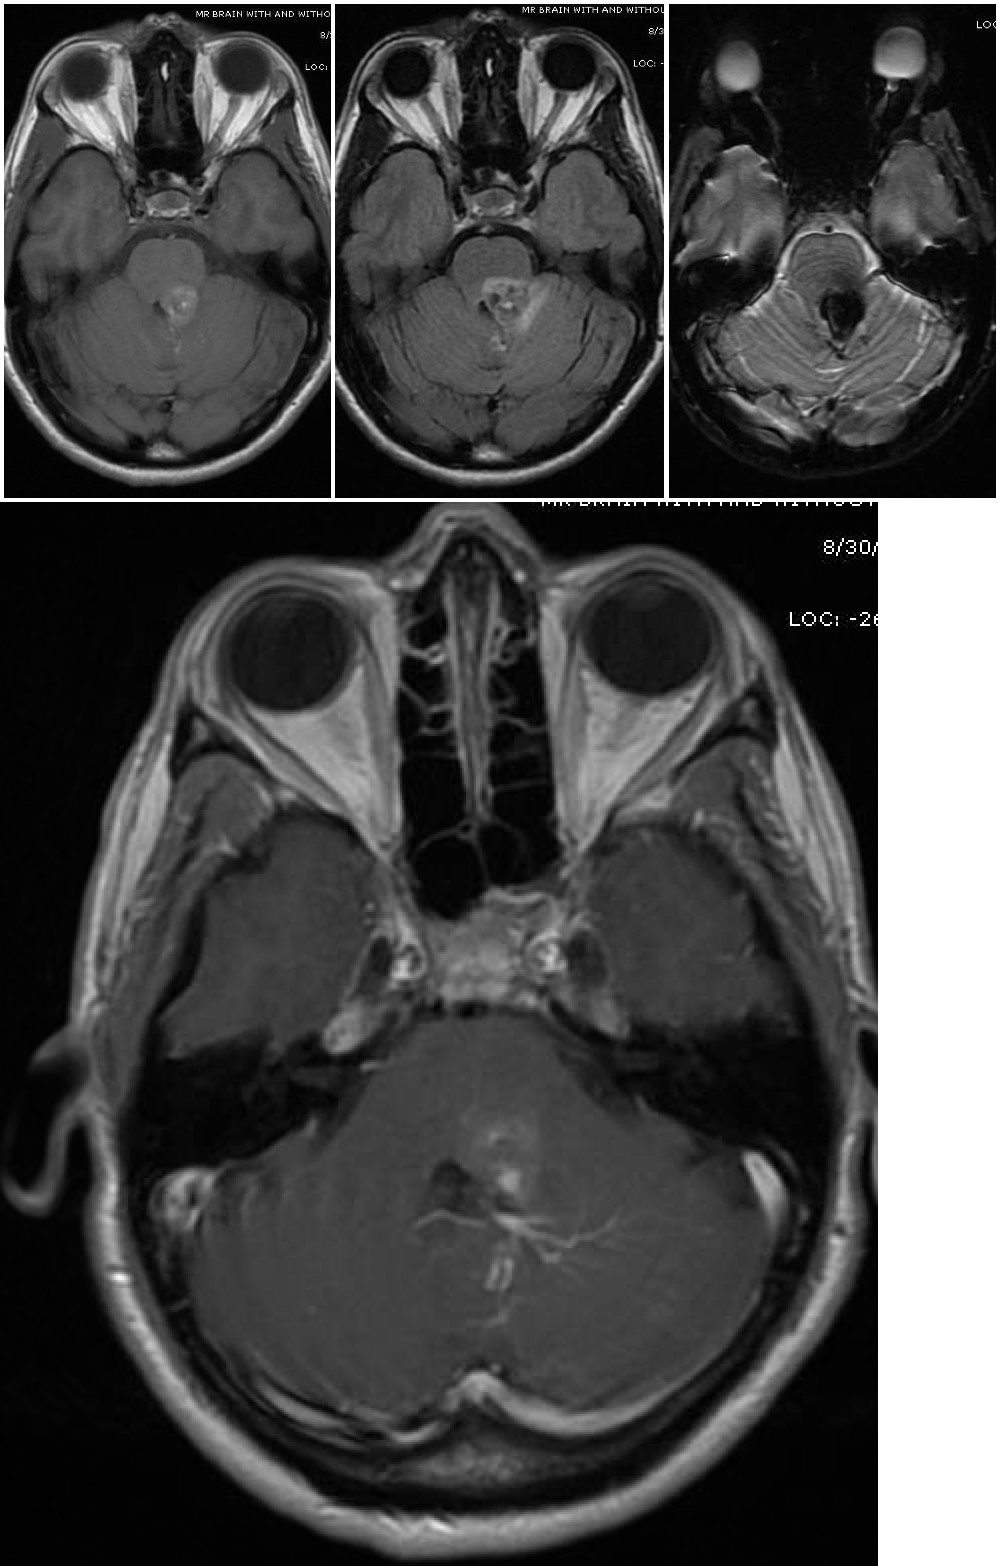 Top three images - Magnetic resonance imaging depicts a cavernous malformation in the left middle cerebellar peduncle of a 42 year old woman who presented with right sided facial numbness and ataxia